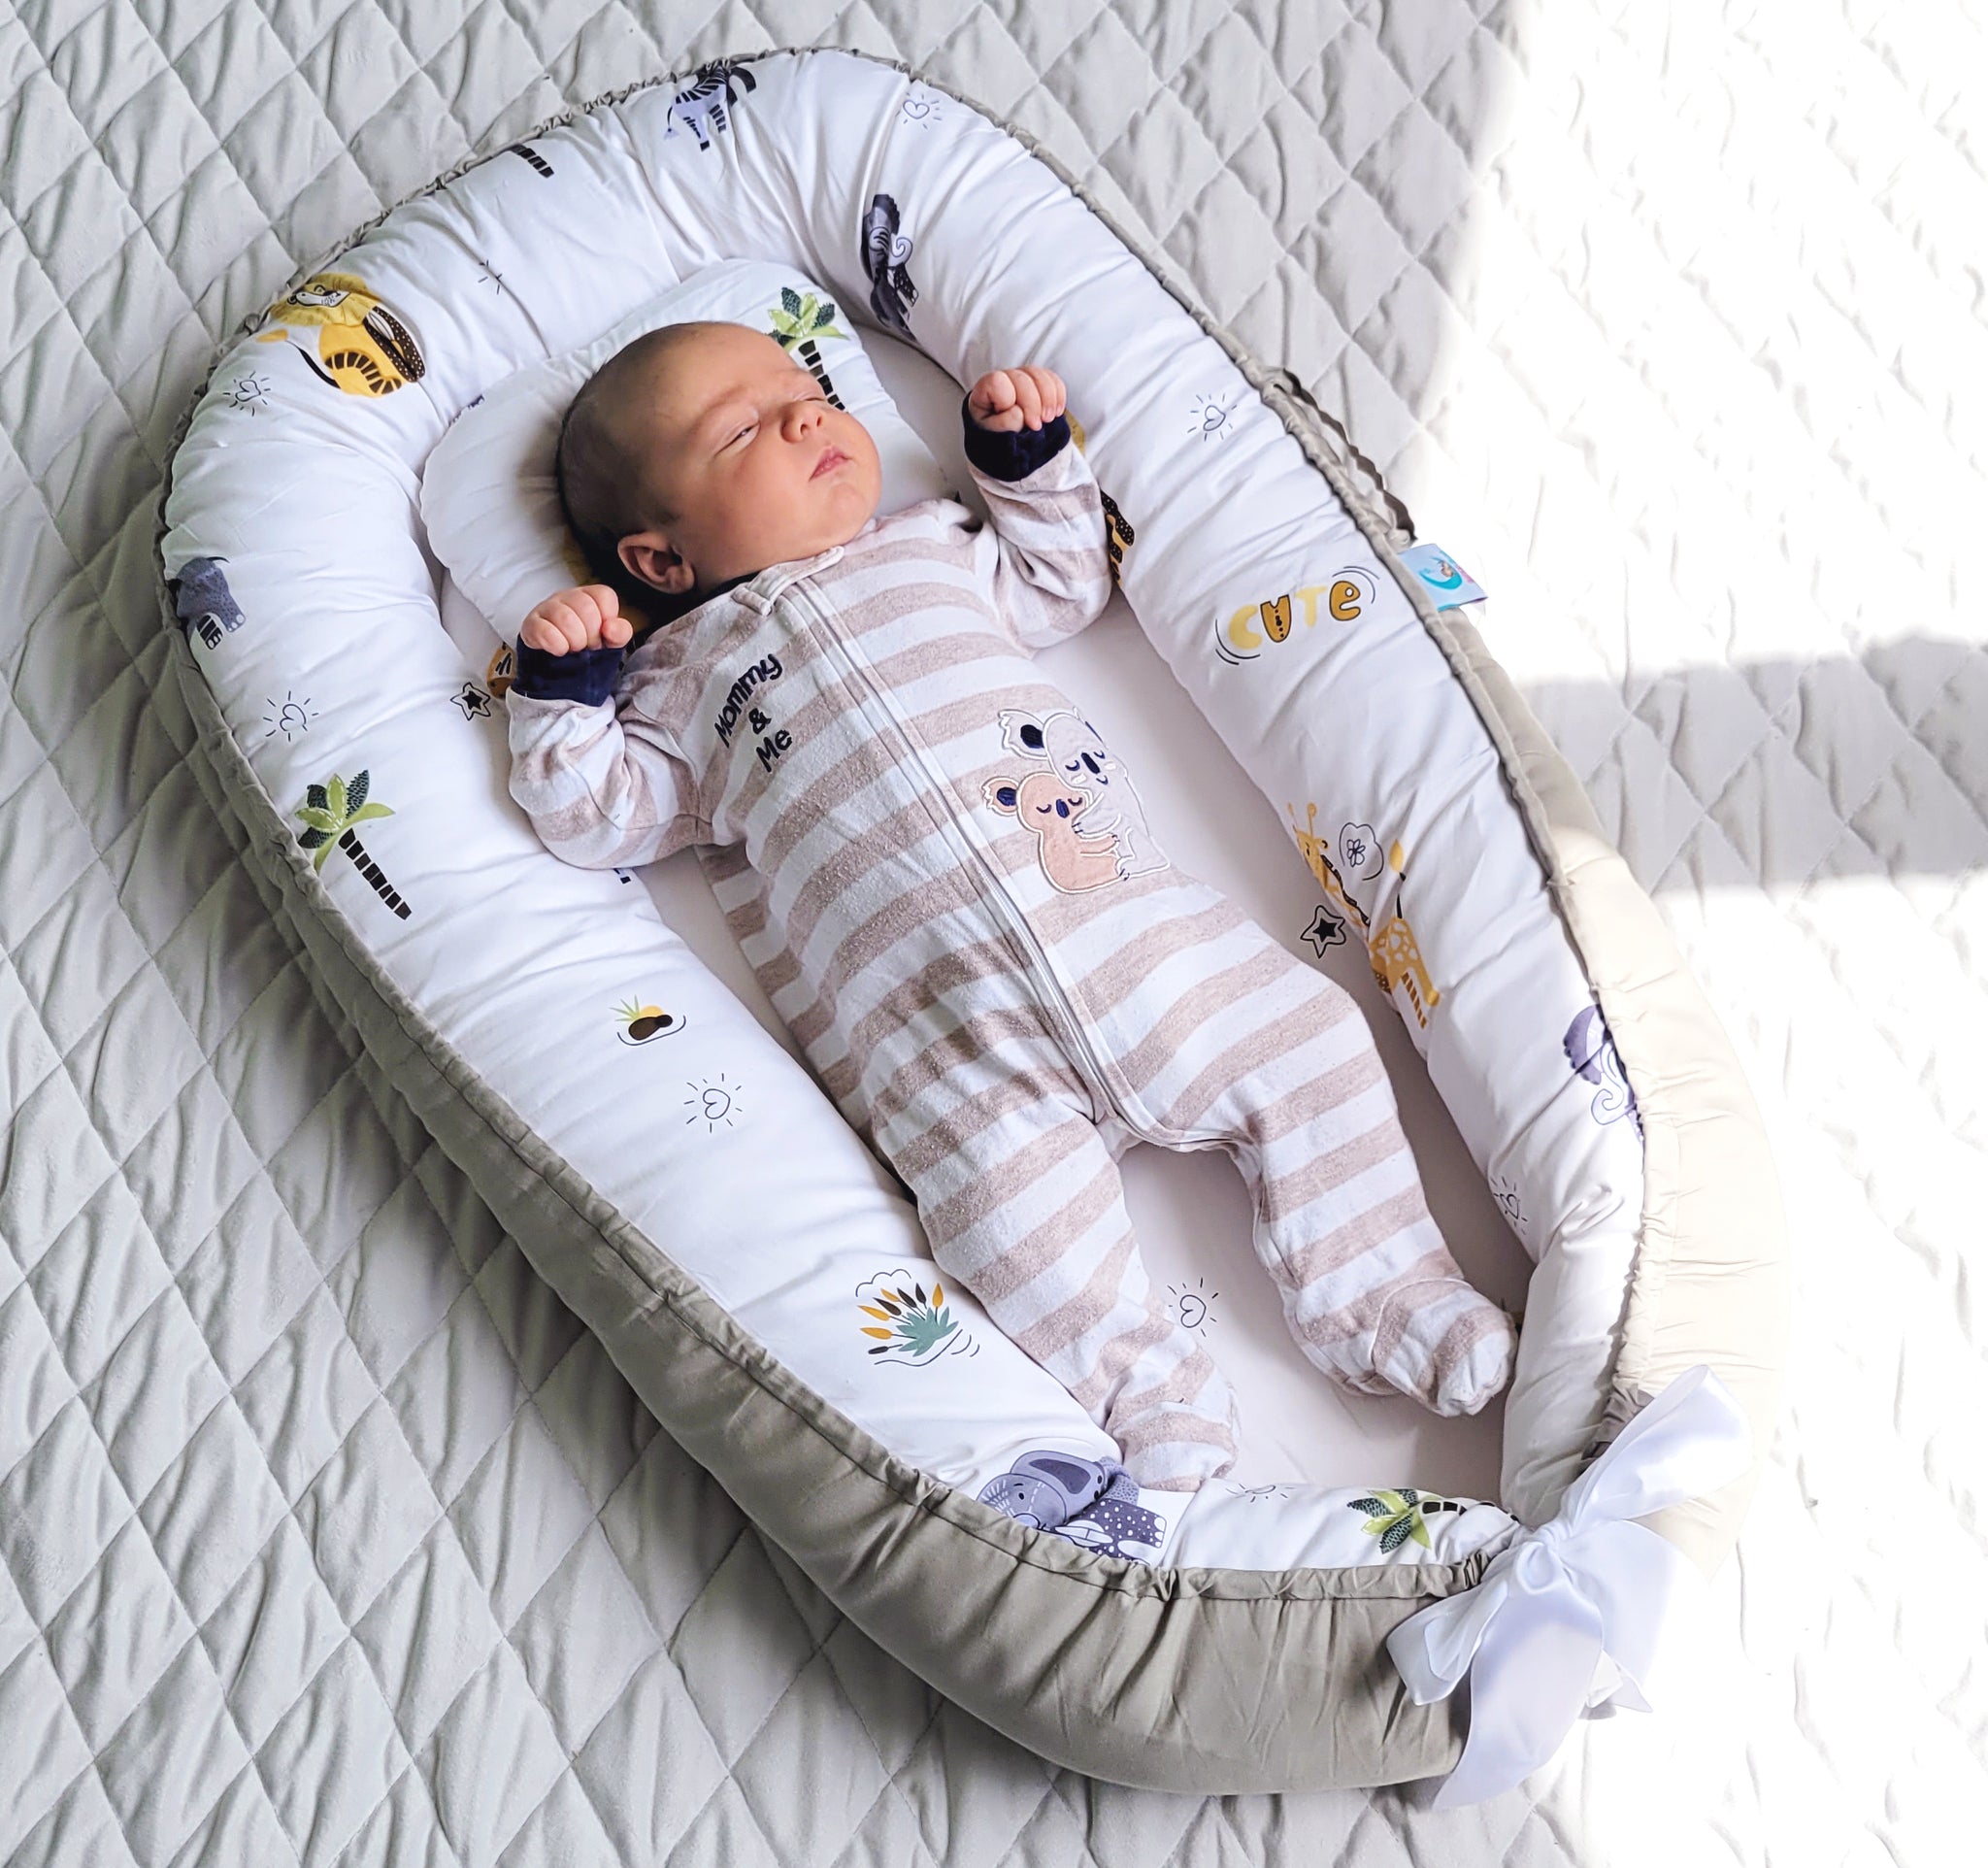 Baby Nest Bionic Bed, Infant Sleeper Bed